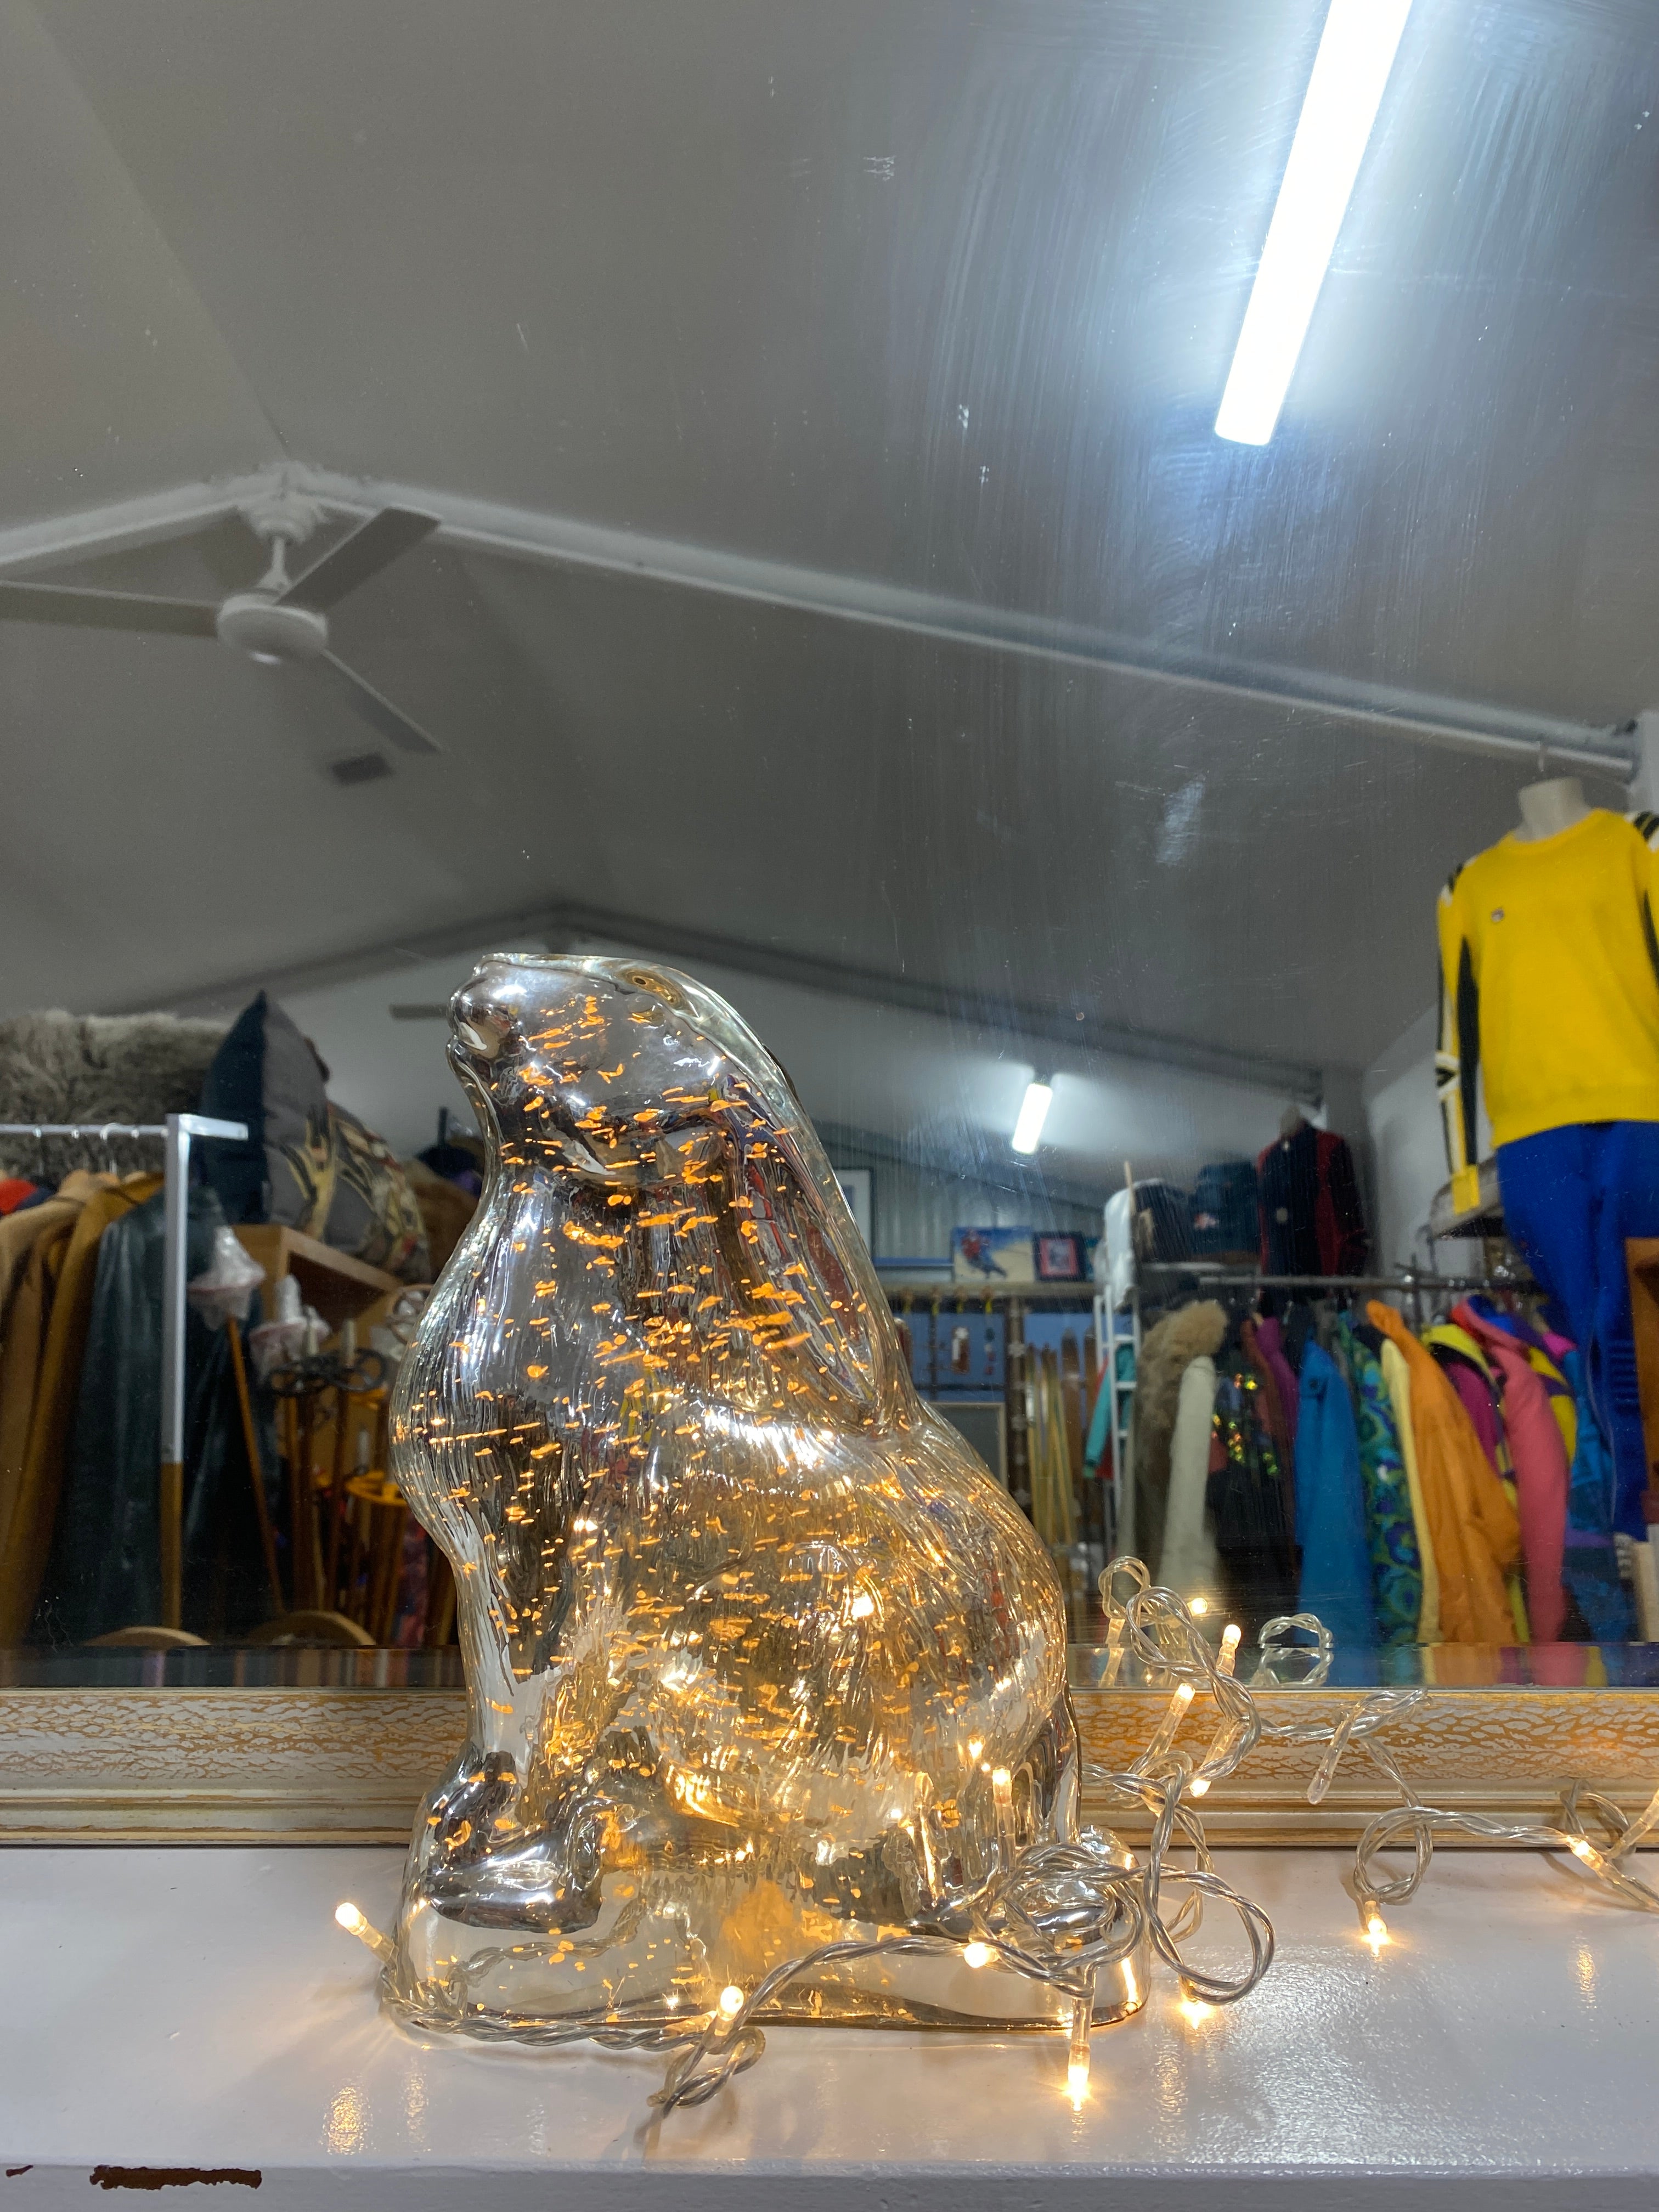 Image shows a silver glass rabbit with fairy lights switched on and displayed externally. The rabbit is sitting on its haunches with it's nose in the air, against a mirror backdrop reflecting vintage snow clothing & sitting on a white bench. Rabbit viewed from the side.